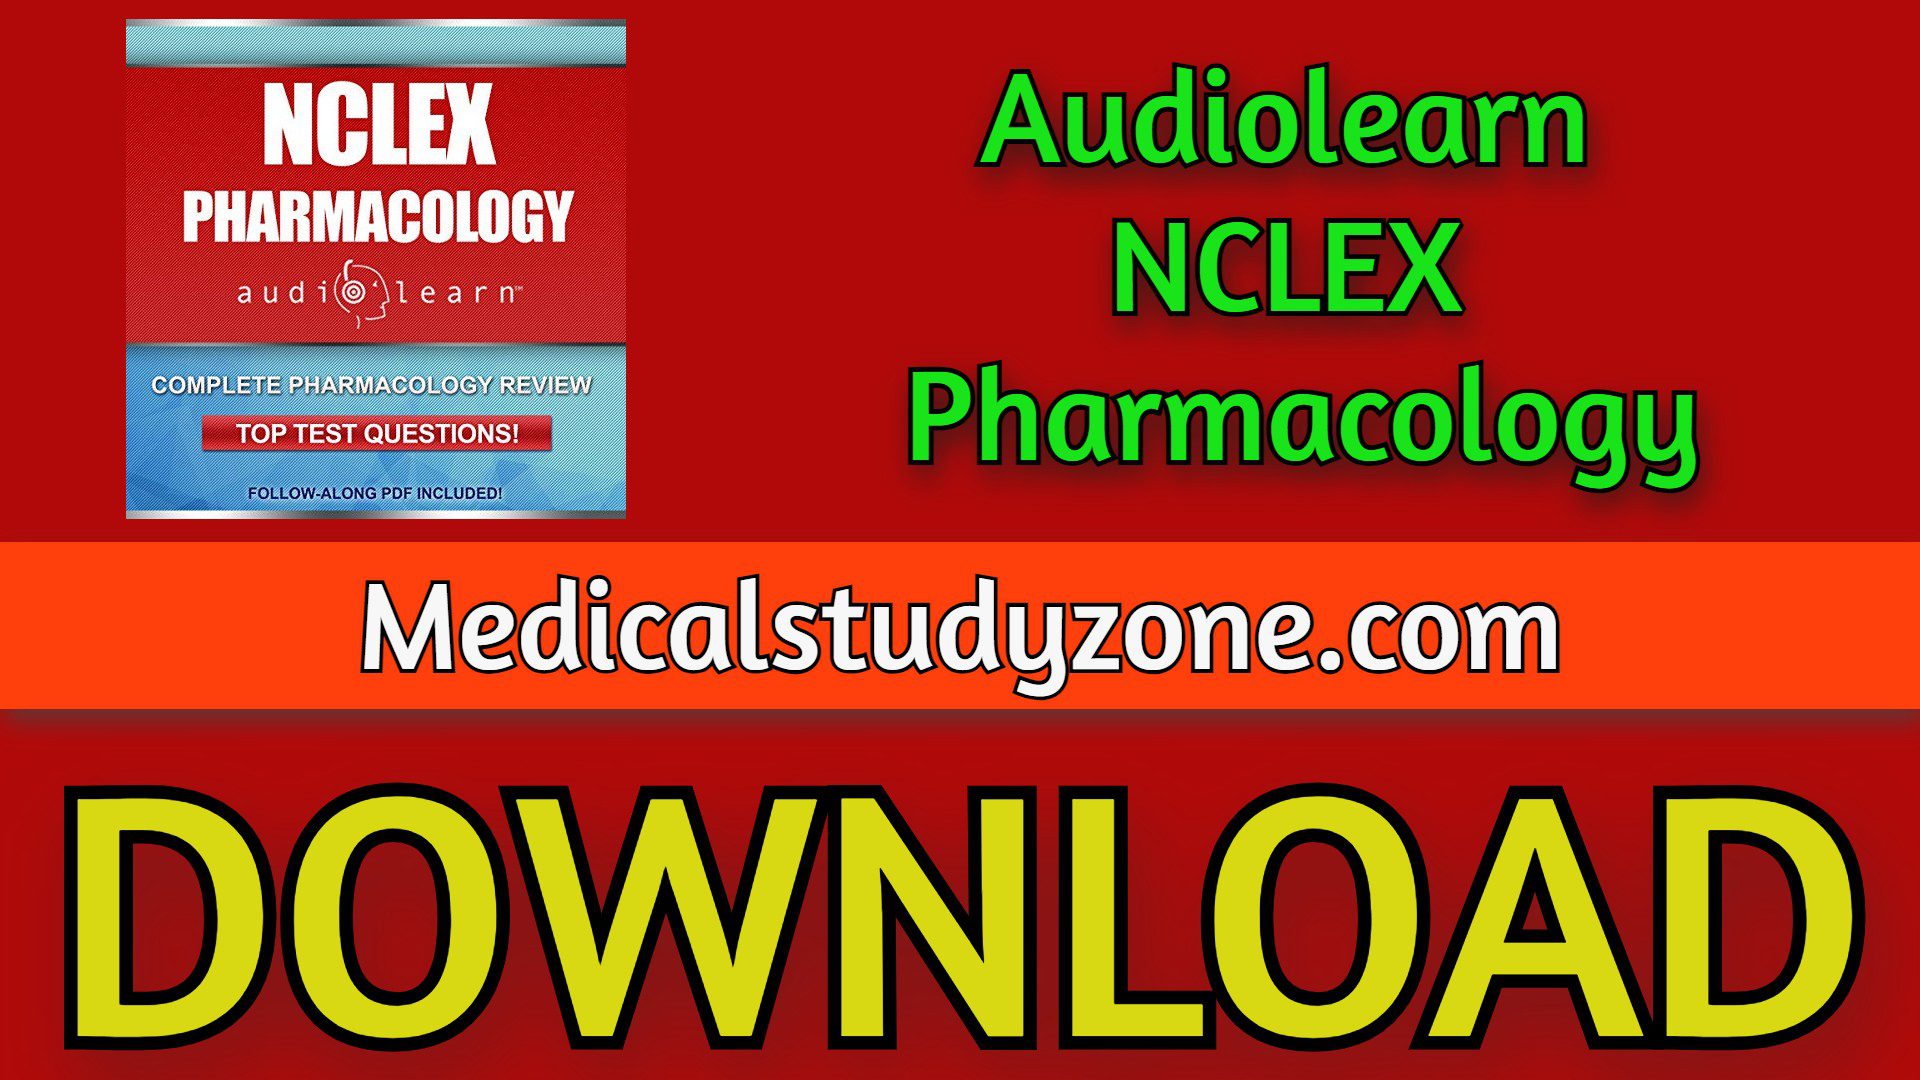 Audiolearn NCLEX Pharmacology 2023 Free Download